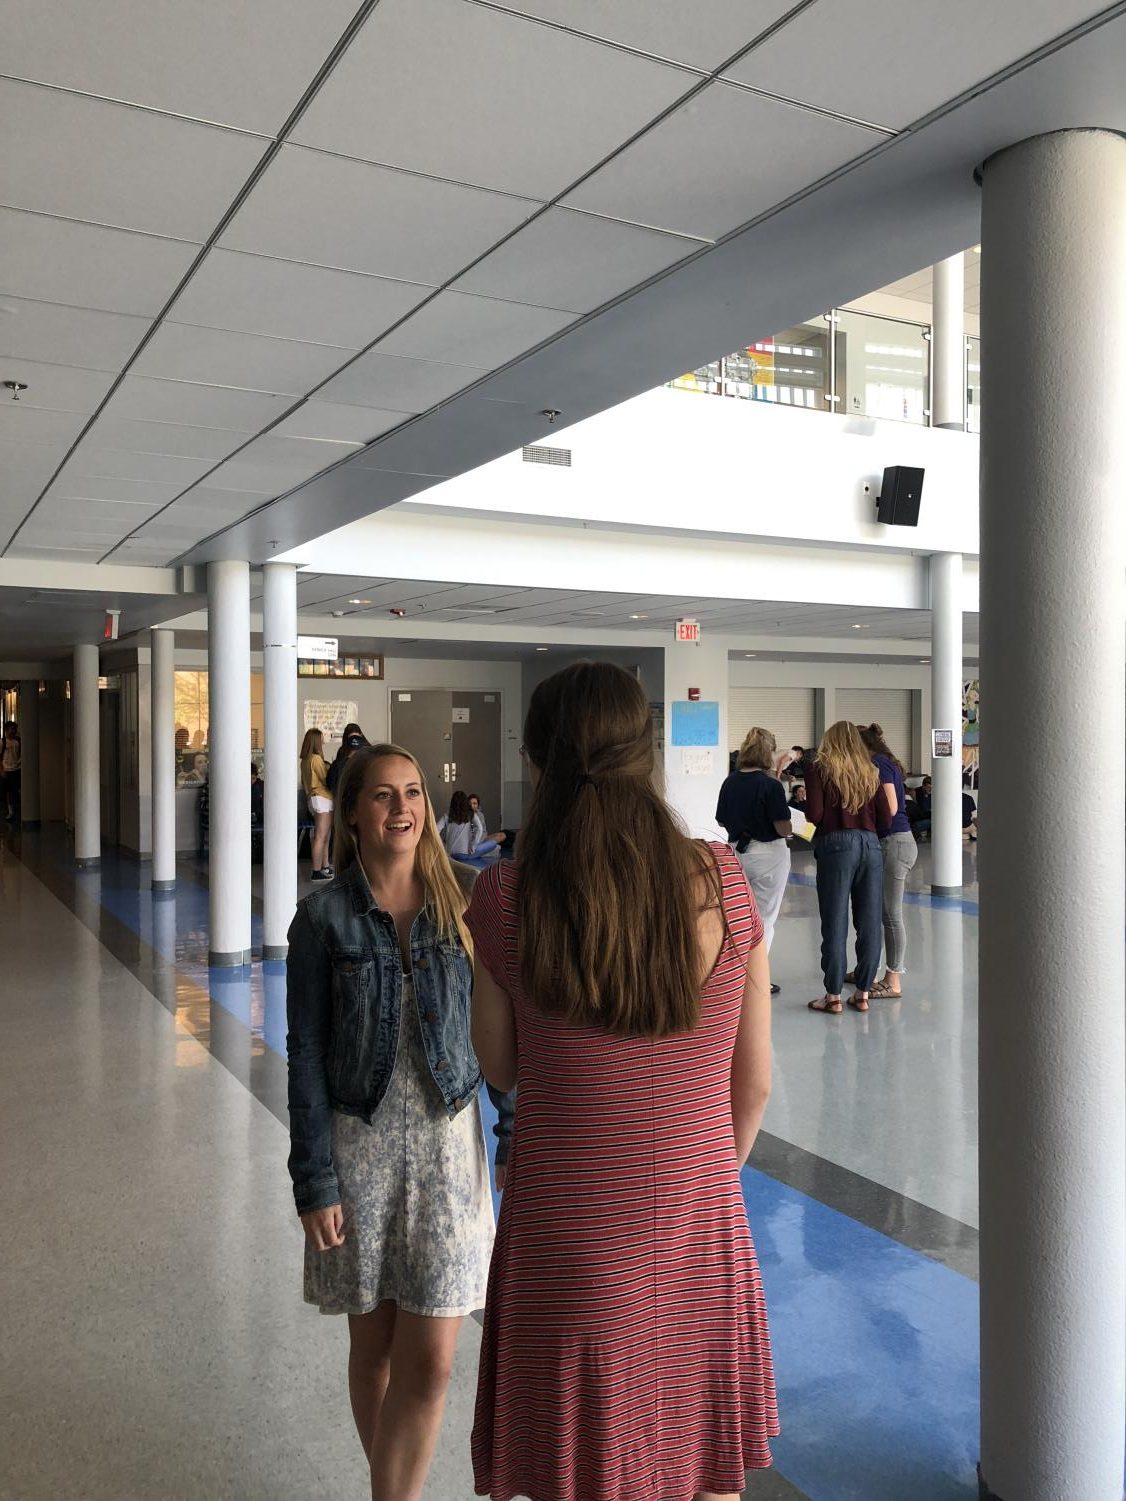 Some of the best conversations are those overheard by other people walking in the halls while you lap or walk to class. 